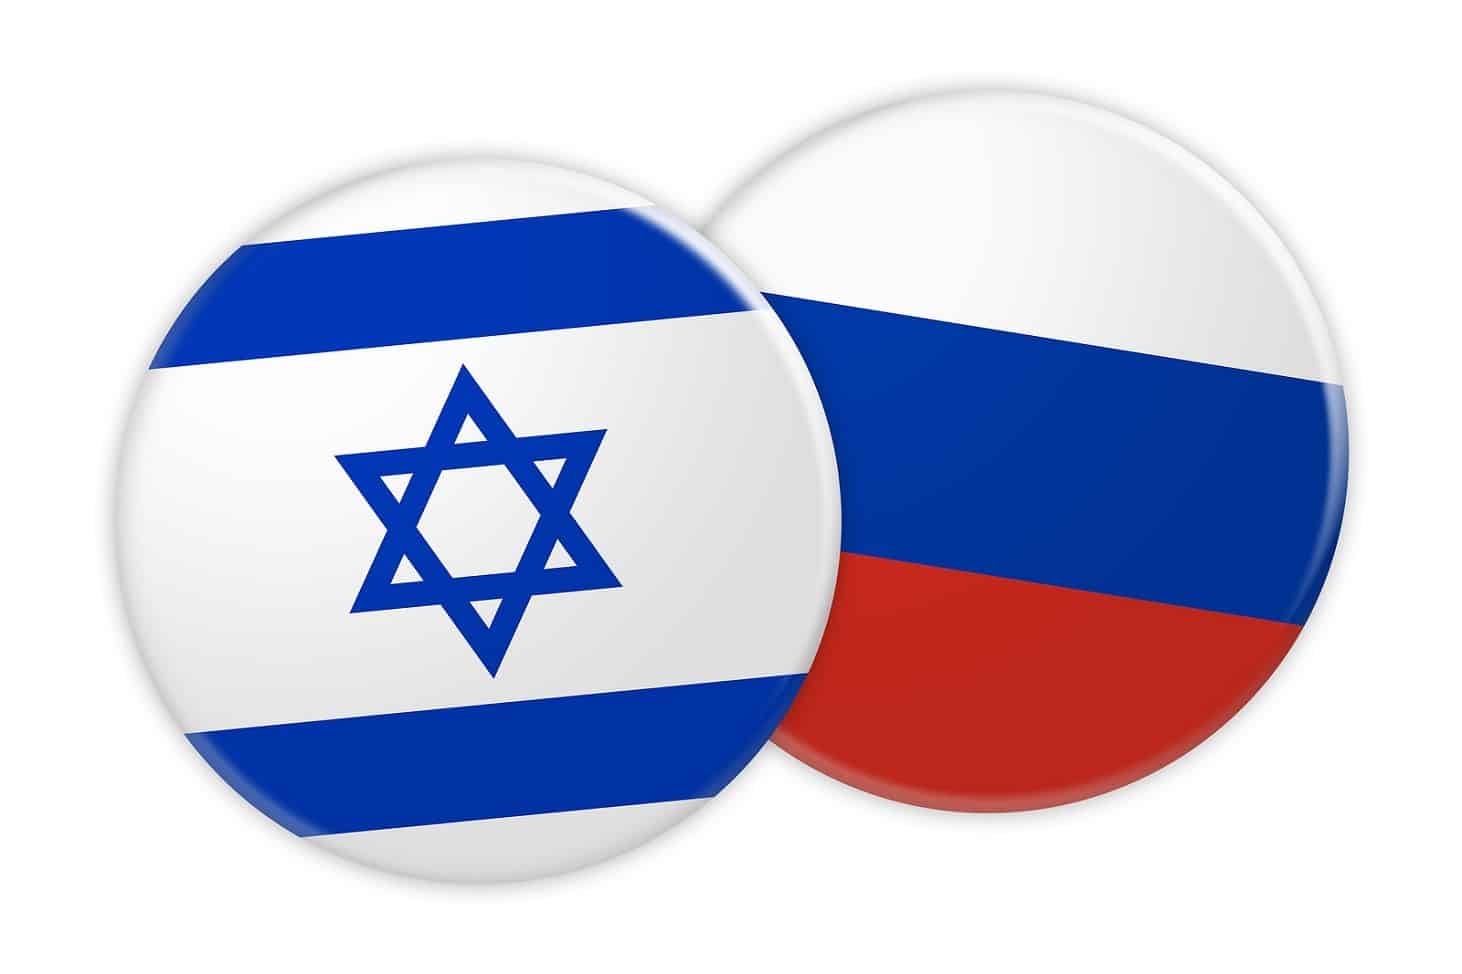 News Concept: Israel Flag Button On Russia Flag Button 3d illustration on white background